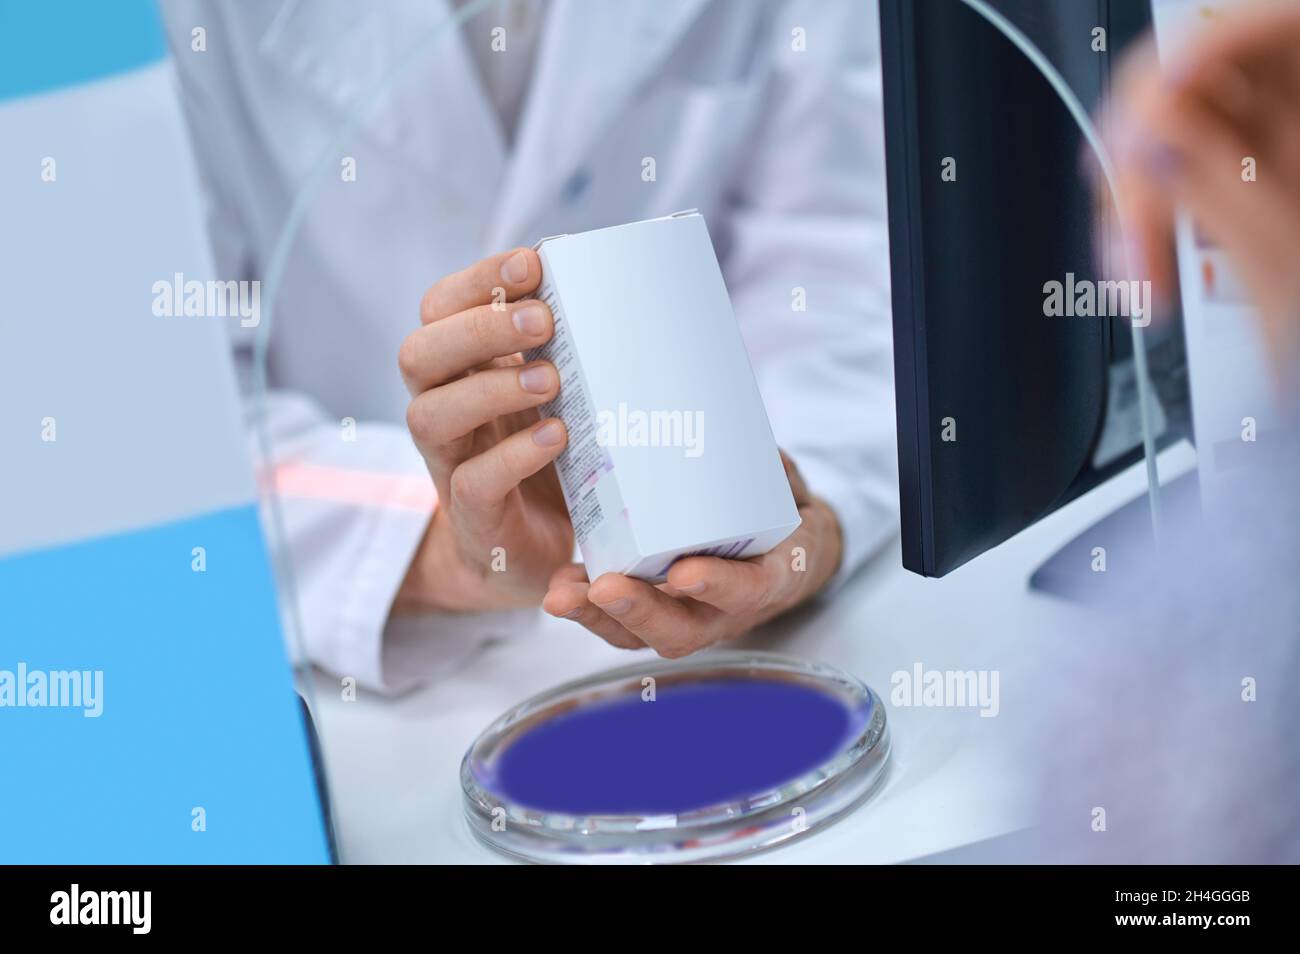 Pharmacy worker hands showing medicine packaging Stock Photo